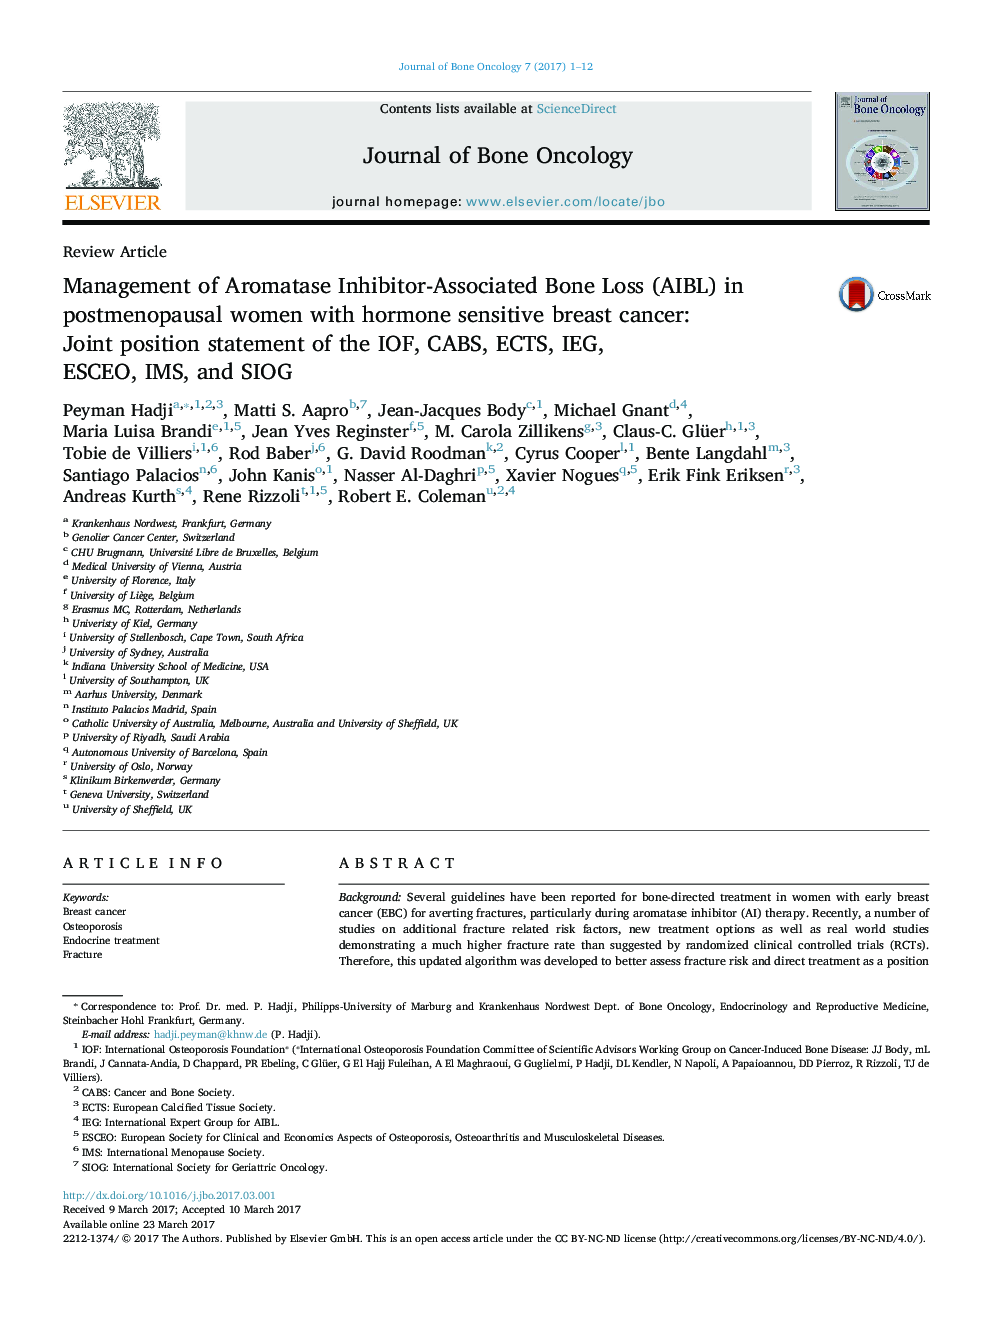 Management of Aromatase Inhibitor-Associated Bone Loss (AIBL) in postmenopausal women with hormone sensitive breast cancer: Joint position statement of the IOF, CABS, ECTS, IEG, ESCEO, IMS, and SIOG